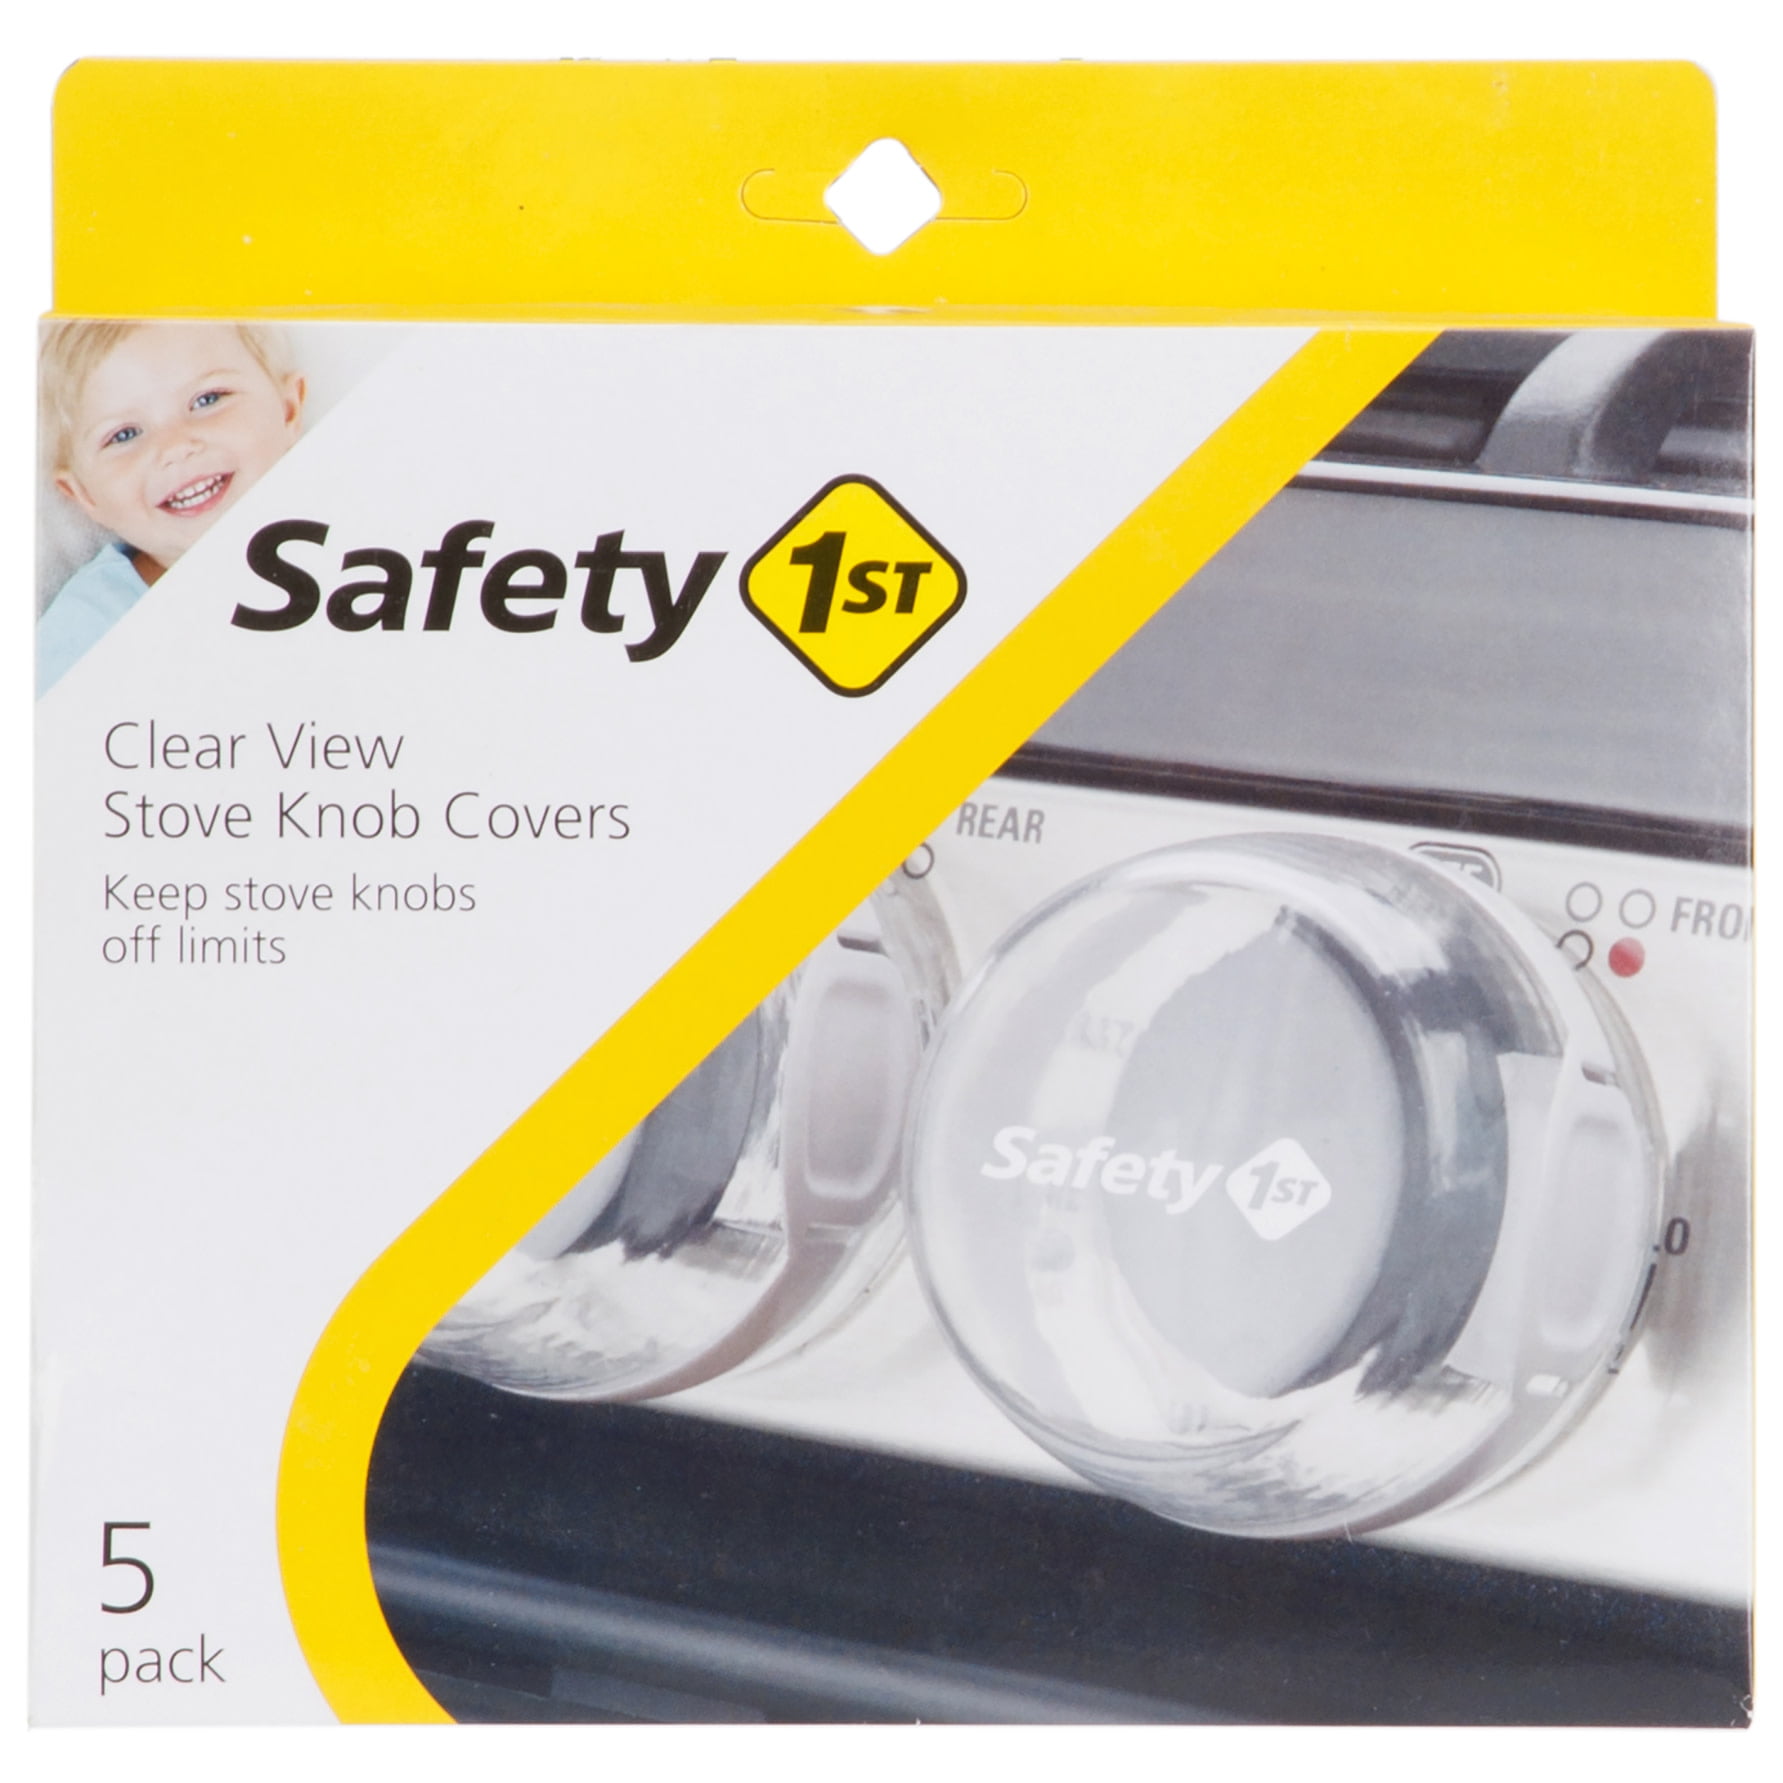 Safety 1ˢᵗ Clear View Stove Knob Covers (5 Pack), Clear